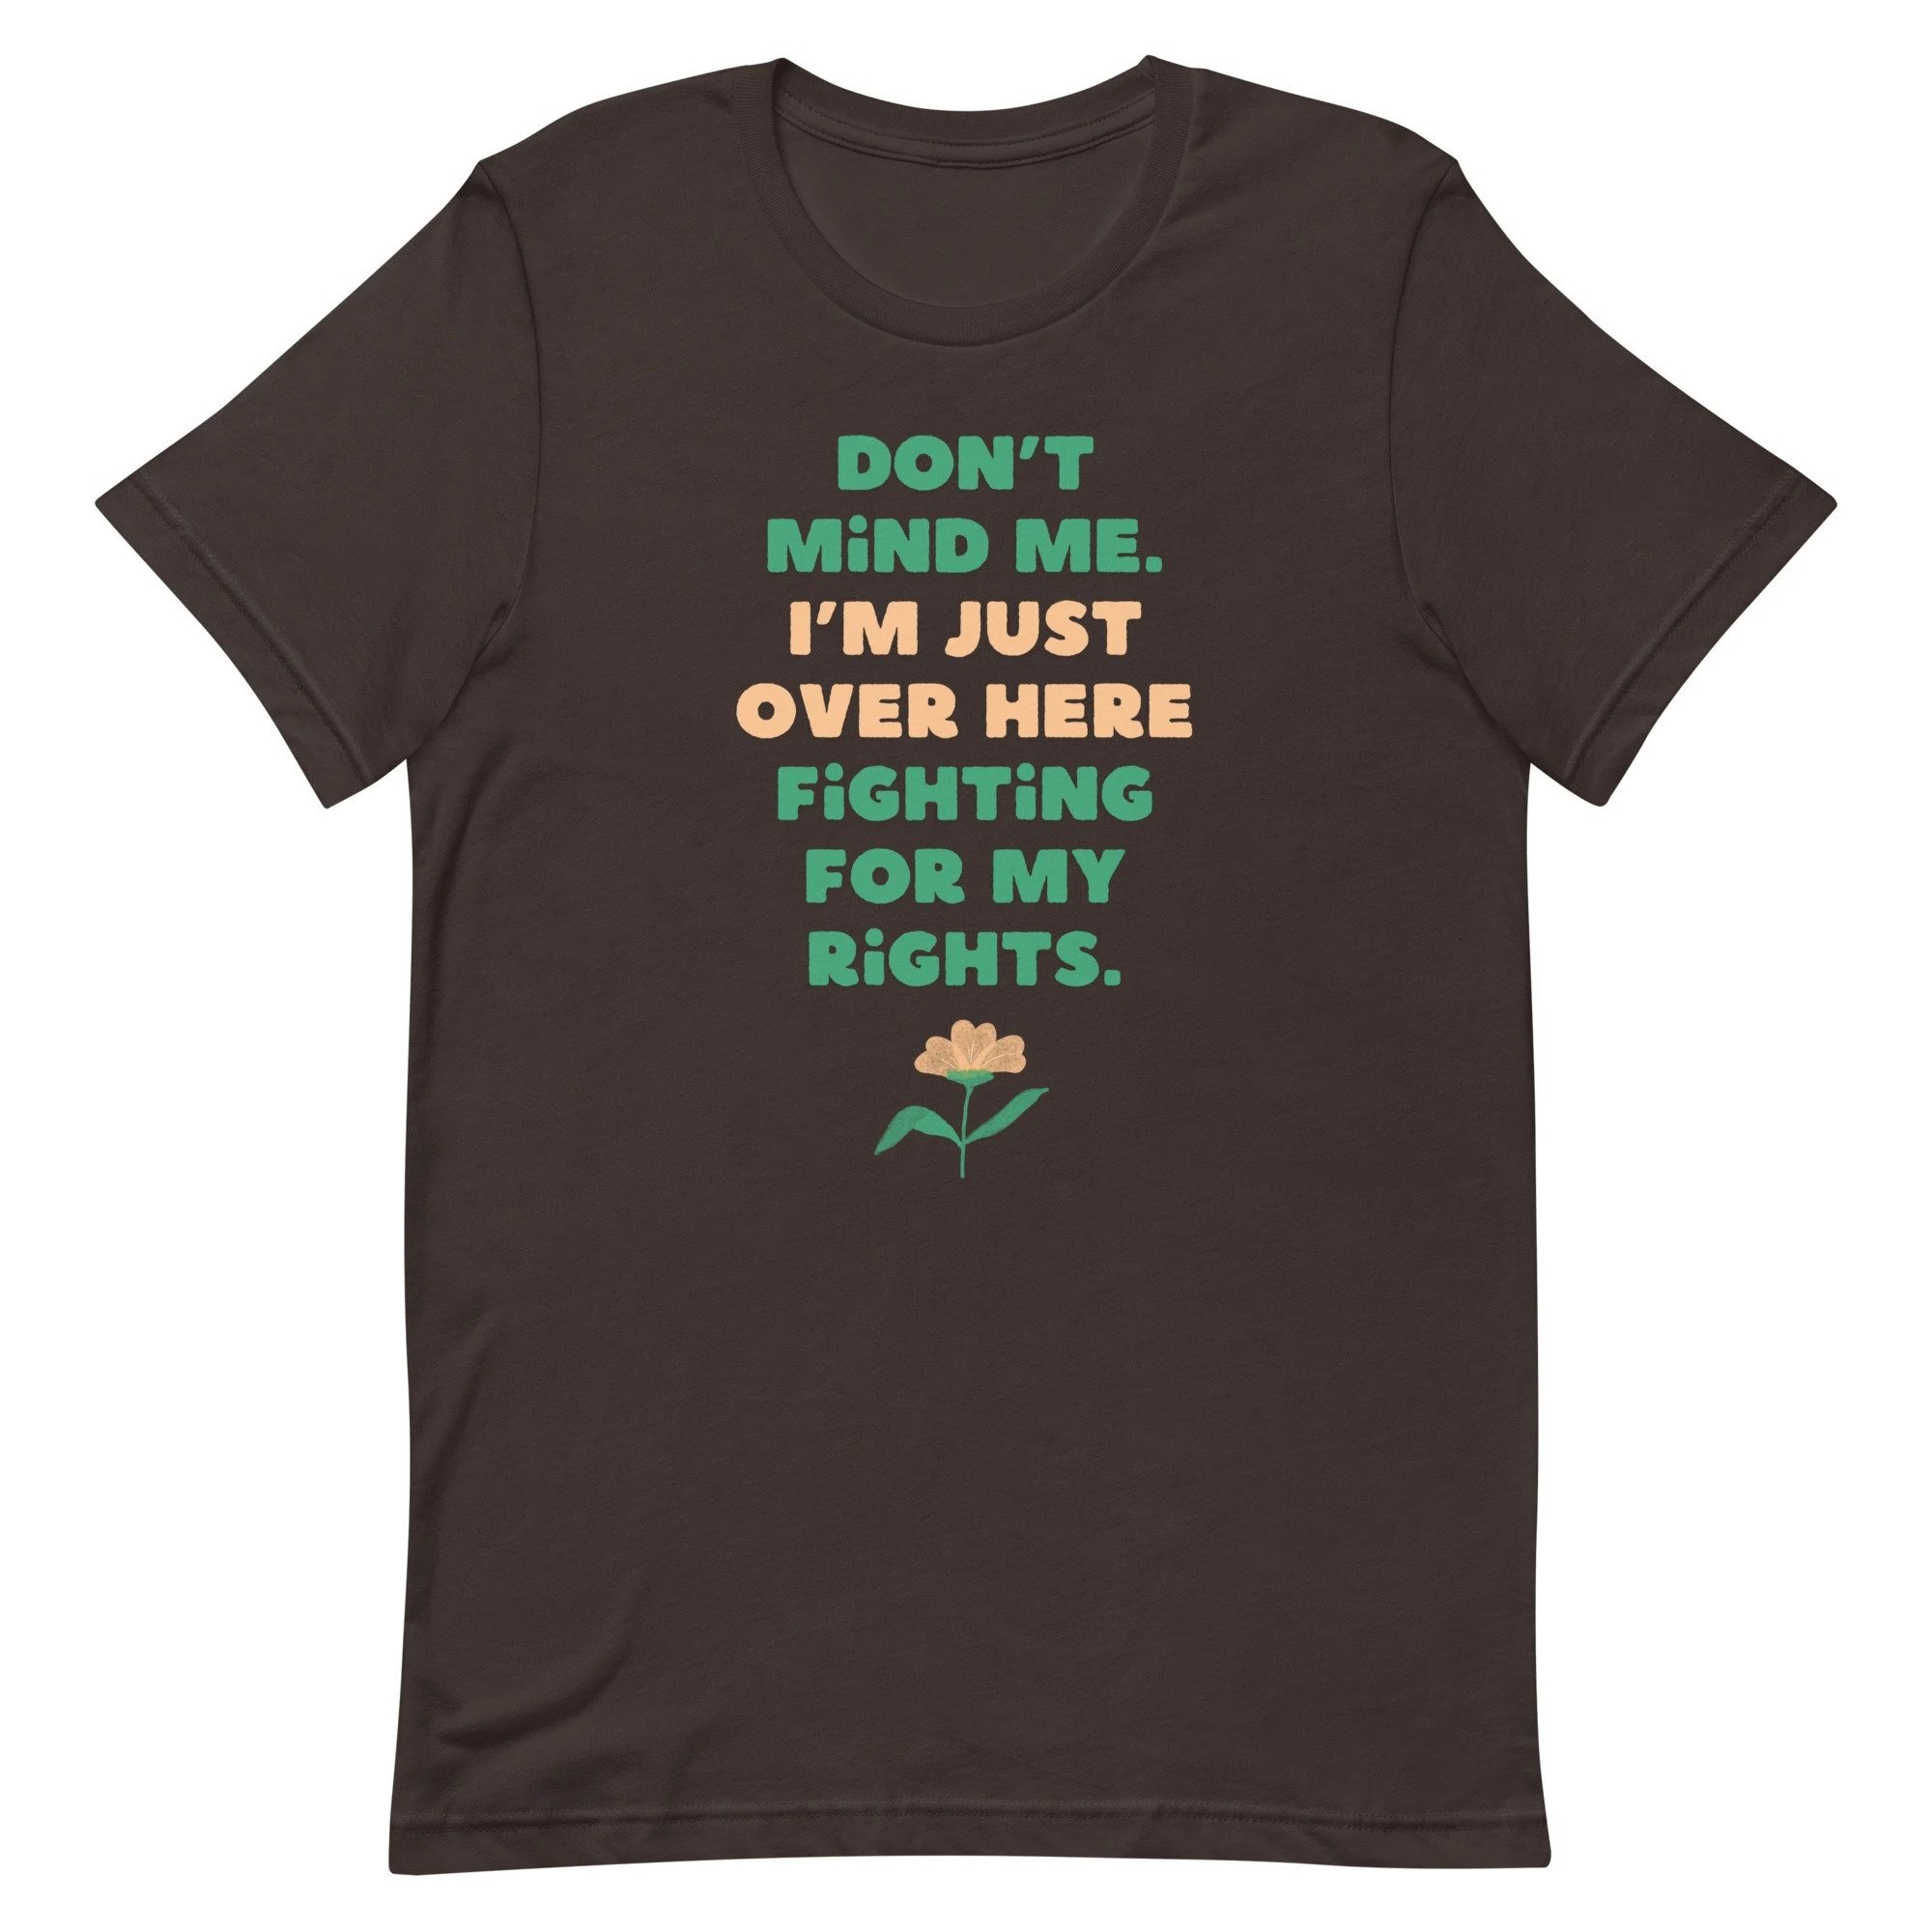 fighting for my rights short-sleeved unisex t-shirt